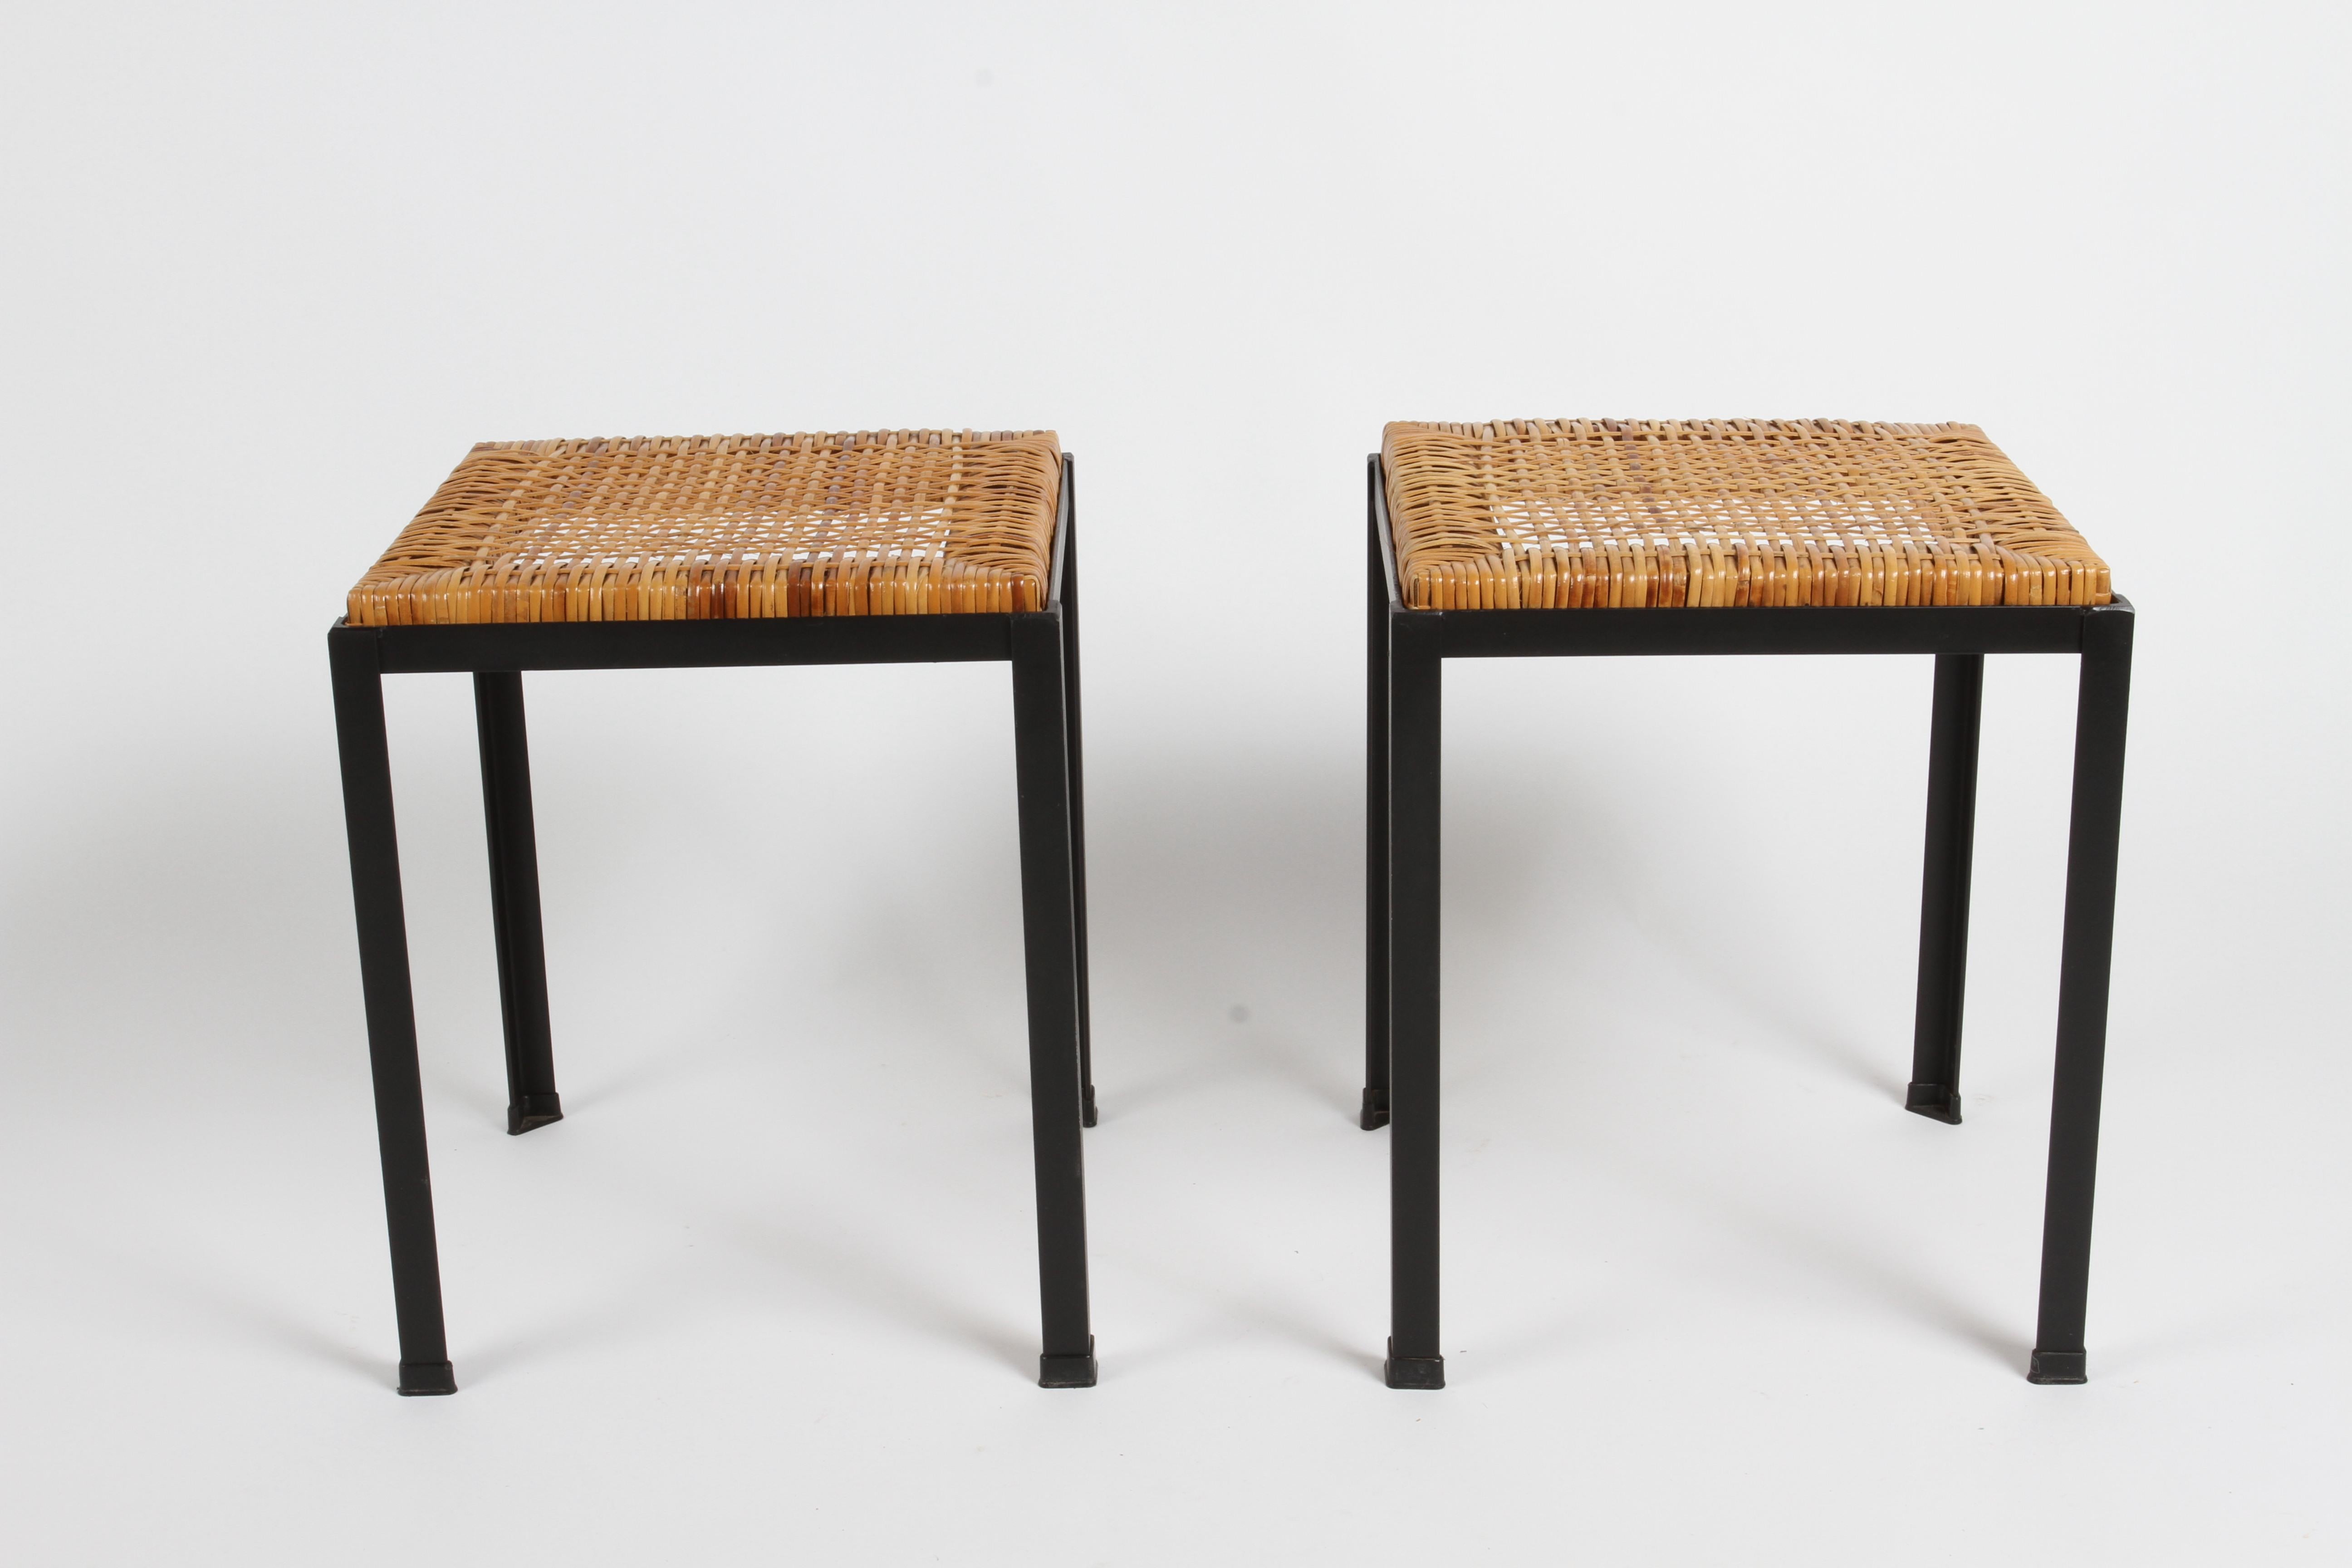 Pair of vintage black iron and handwoven woven cane wicker top stools designed by Danny Ho Fong, from his 1960s Tropical causal California Osetsu Dai Dining Collection. These stools can be used as seating or place a glass top and make them tables.